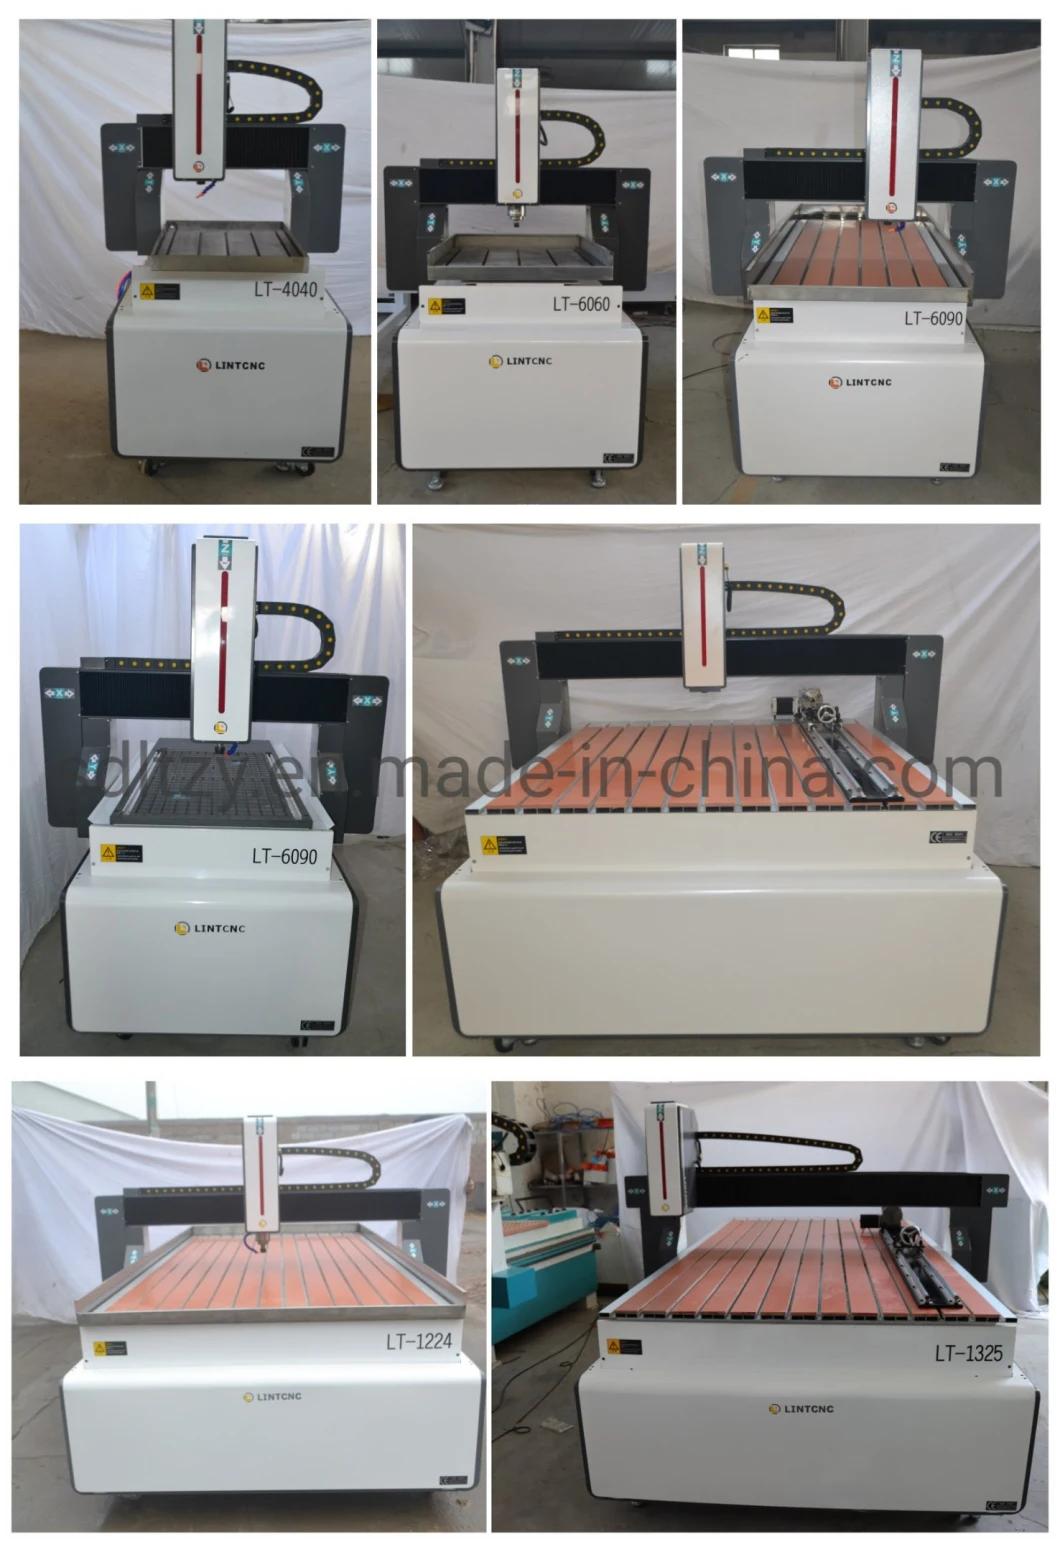 Vacuum Table Woodworking CNC Milling Router 6012 1212 6090 with 2.2kw Vacuum Pump